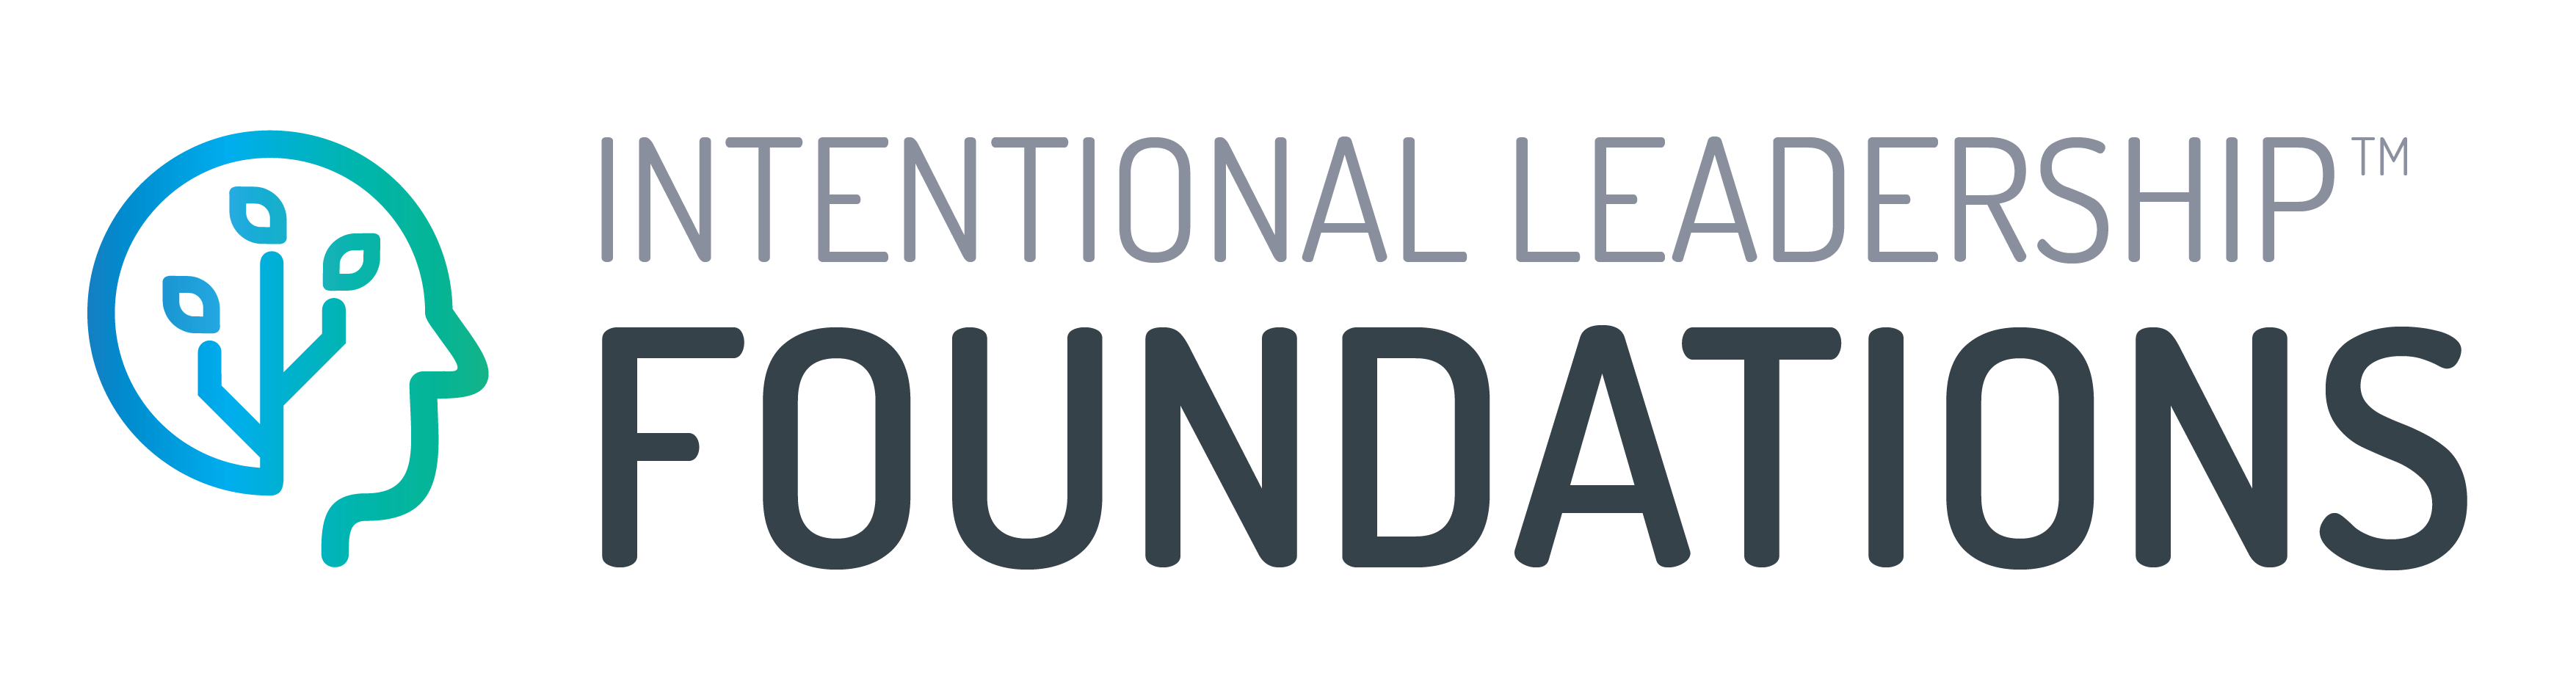 intentional leadership foundations